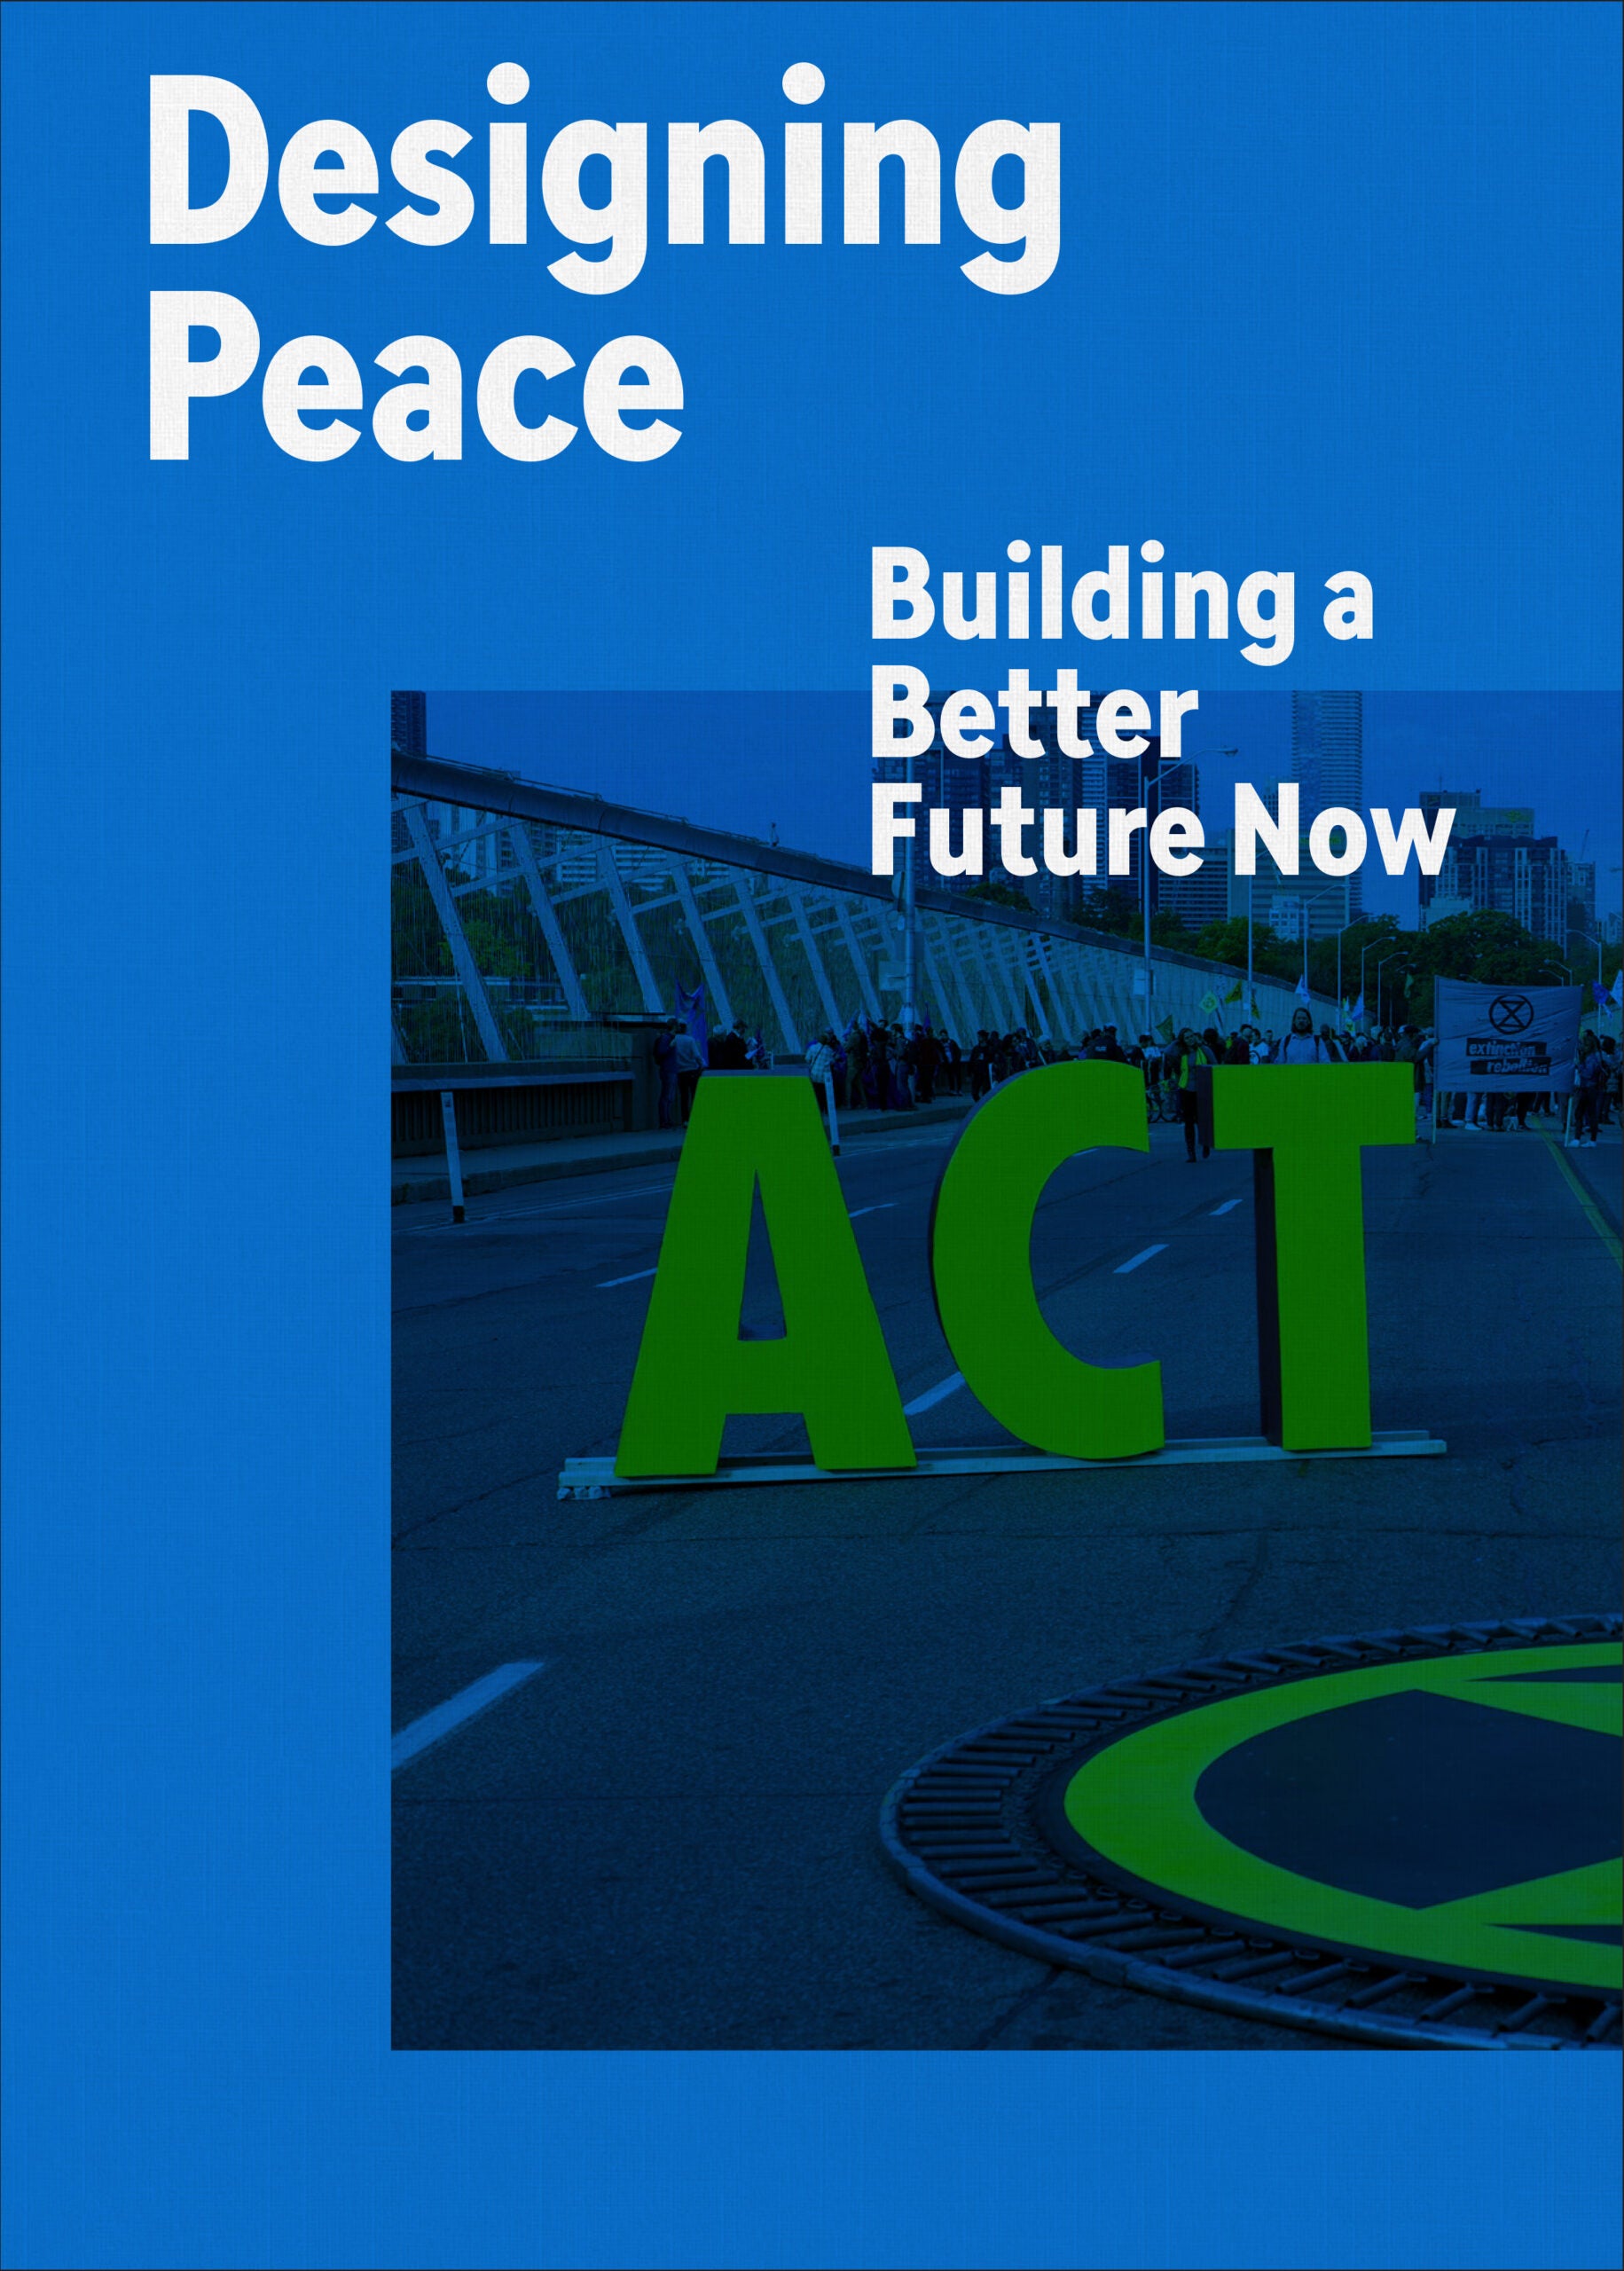 Designers engage with individuals, communities and organizations to create a more sustainable peace. This publication aims to expand the discourse on what is possible if society were to design for peace.